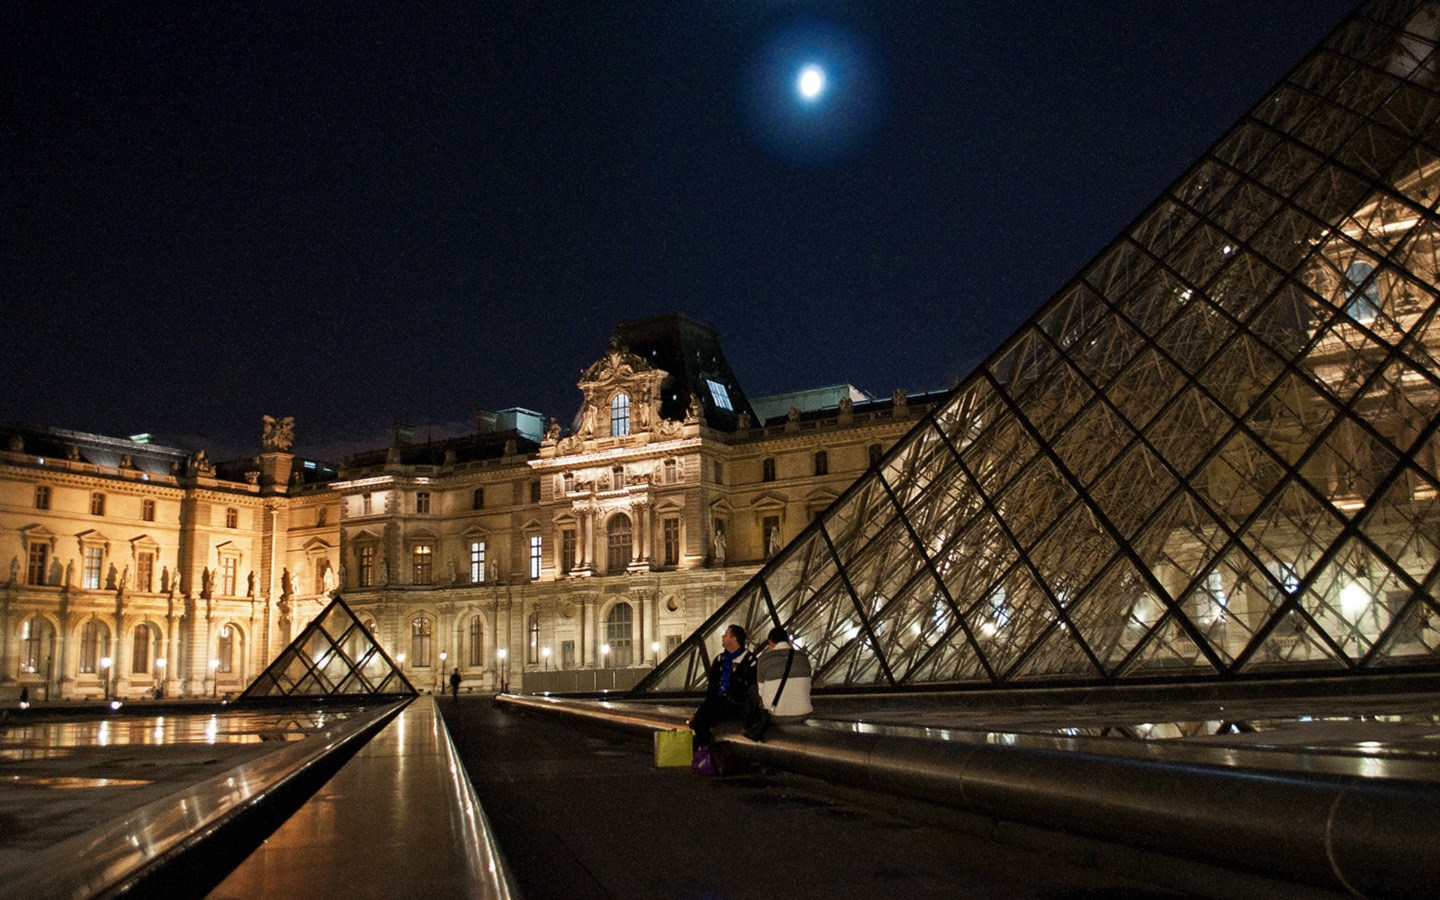 The Louvre museum in Paris at night